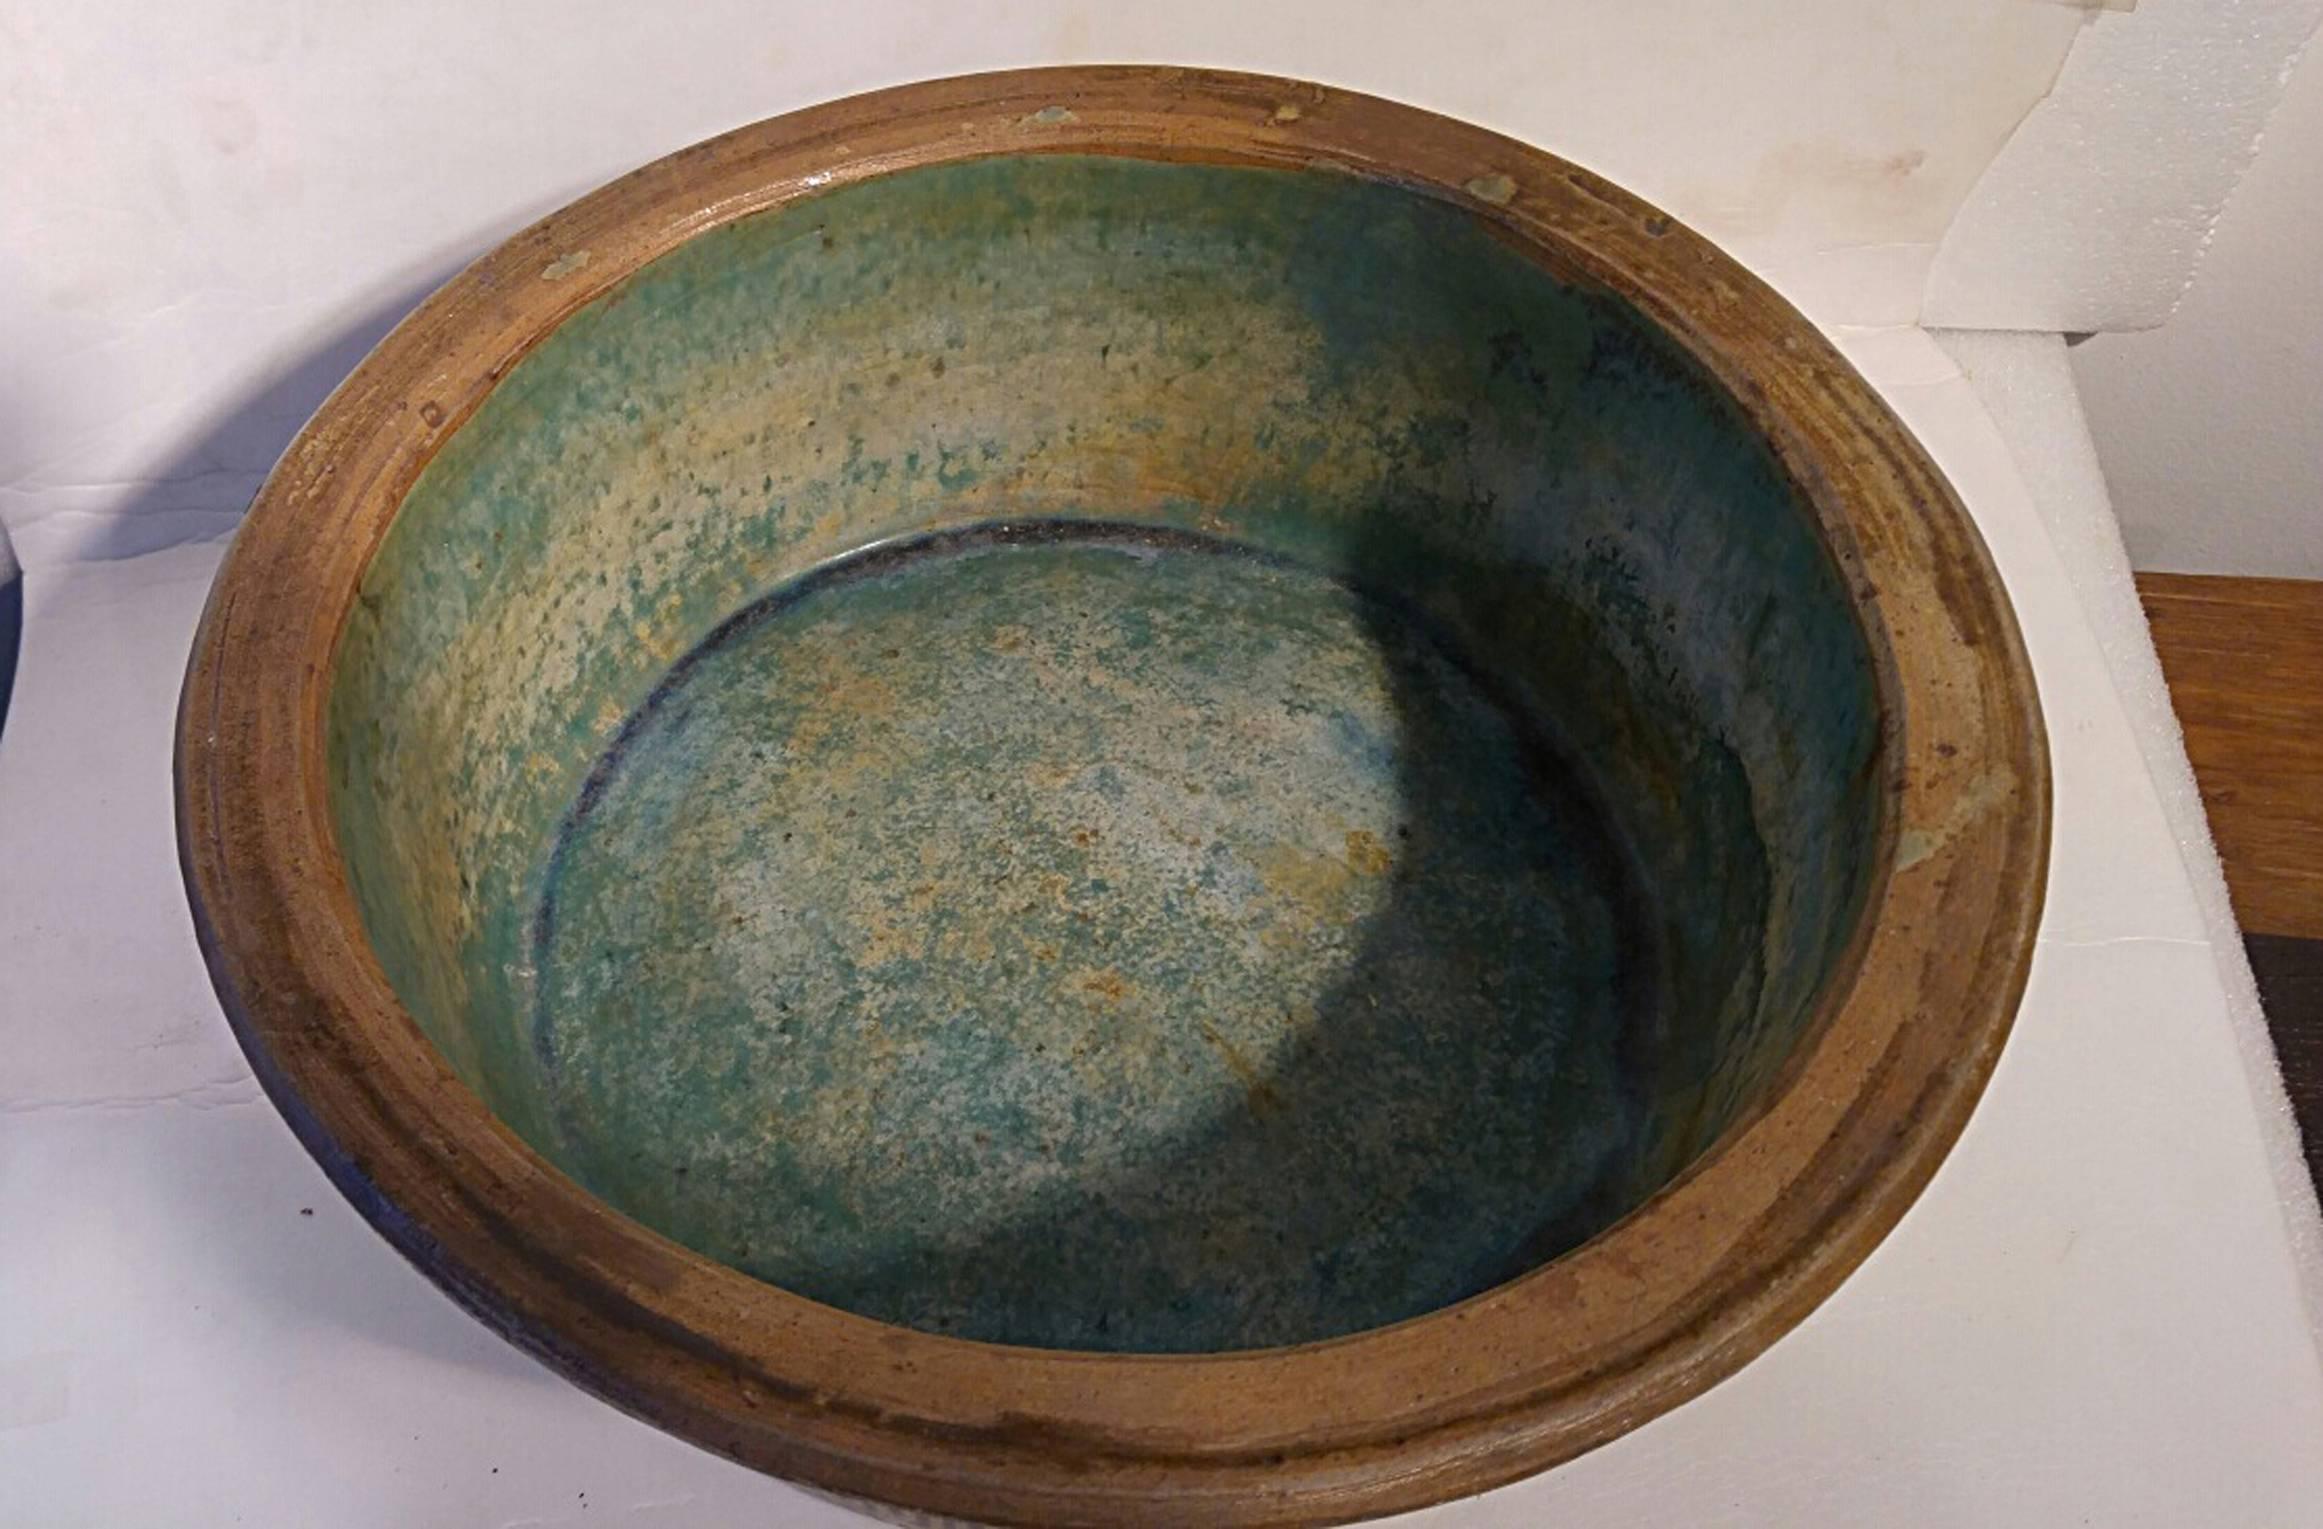 Indonesian Tall Ceramic Bowl from Indonesia